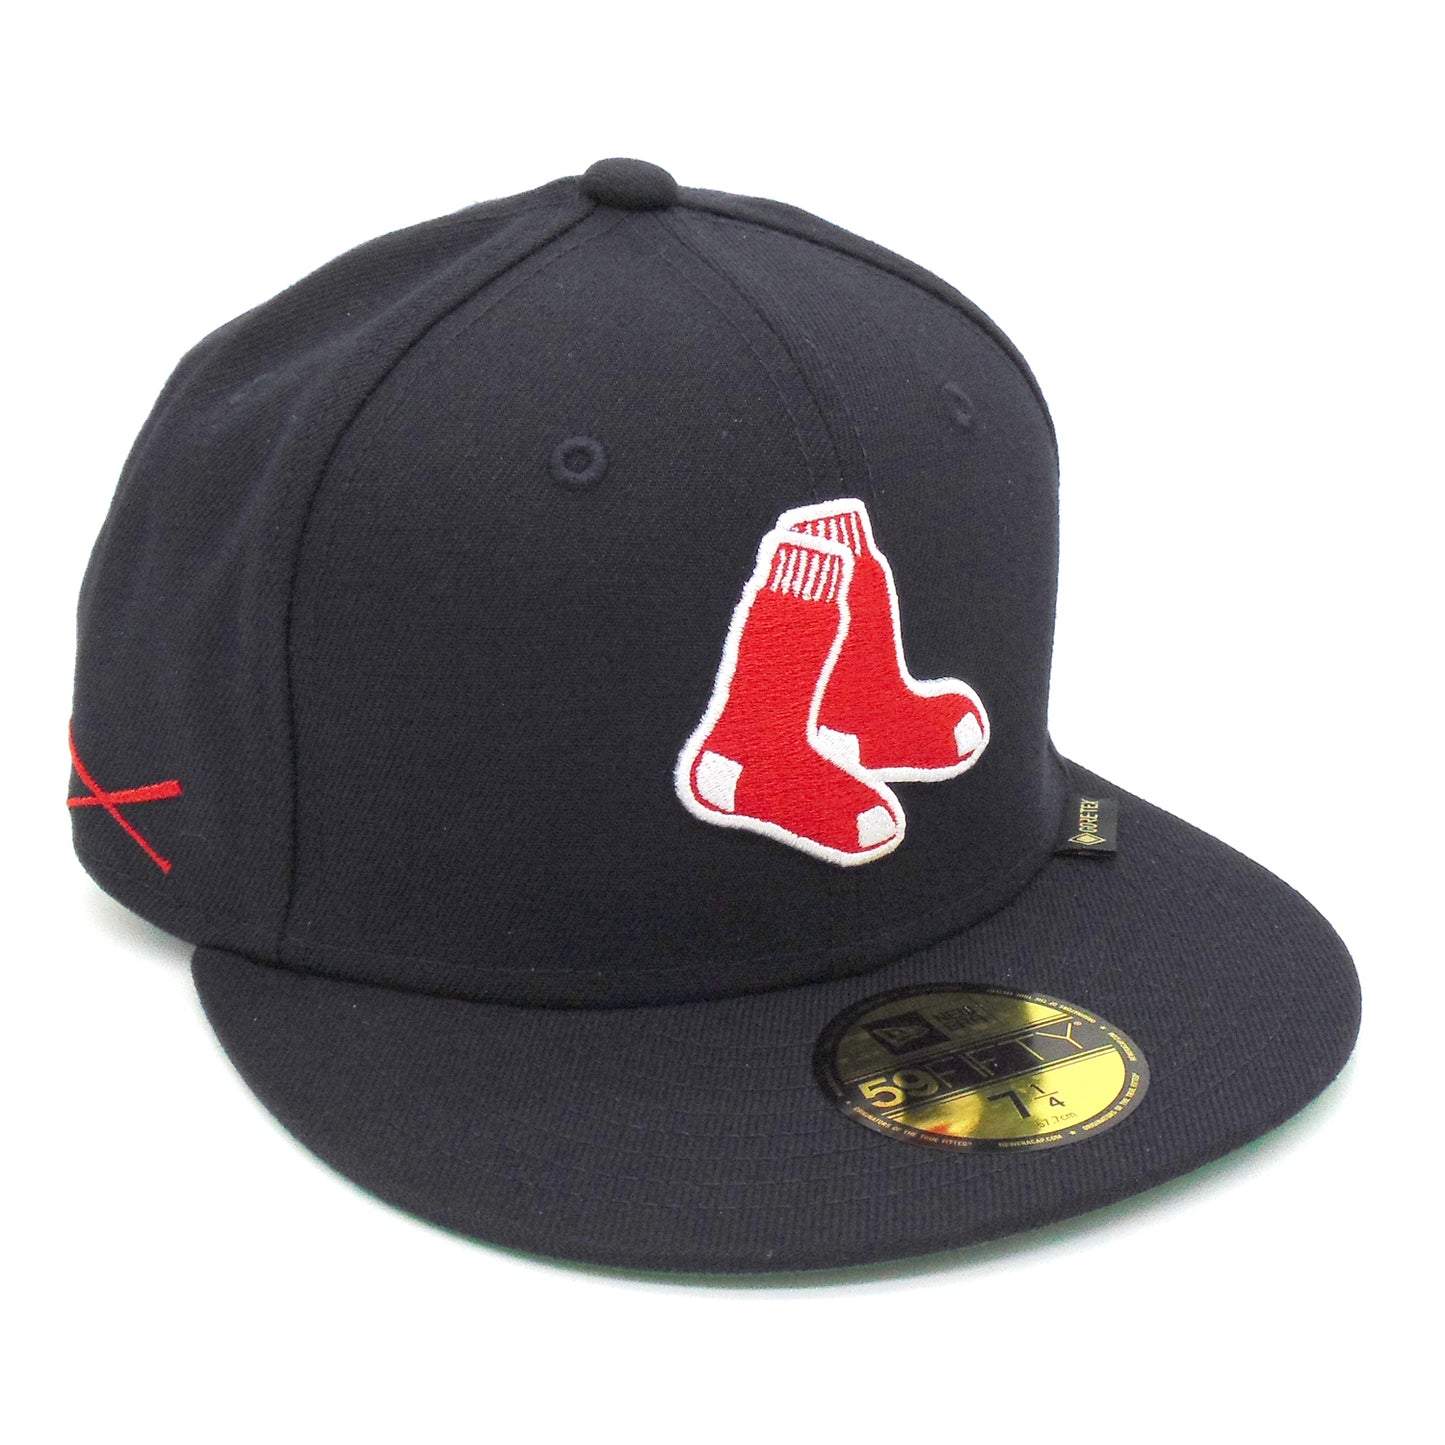 Boston Red Sox JustFitteds Exclusive Gore-tex New Era Cap Navy